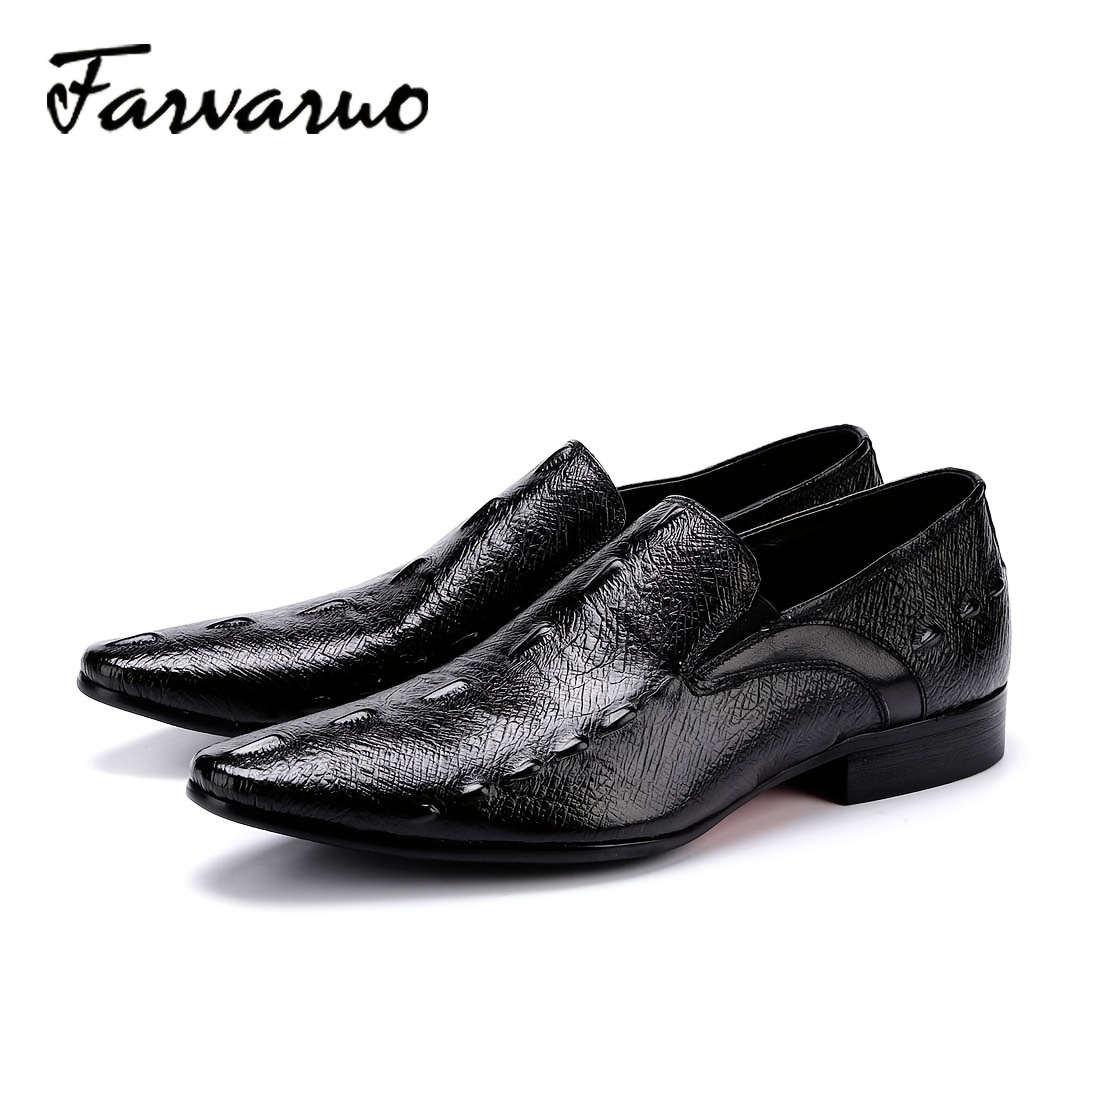 Men Patent Leather Dress Shoes Formal Oxford Comfort Pointy Toe Wedding  Shoes